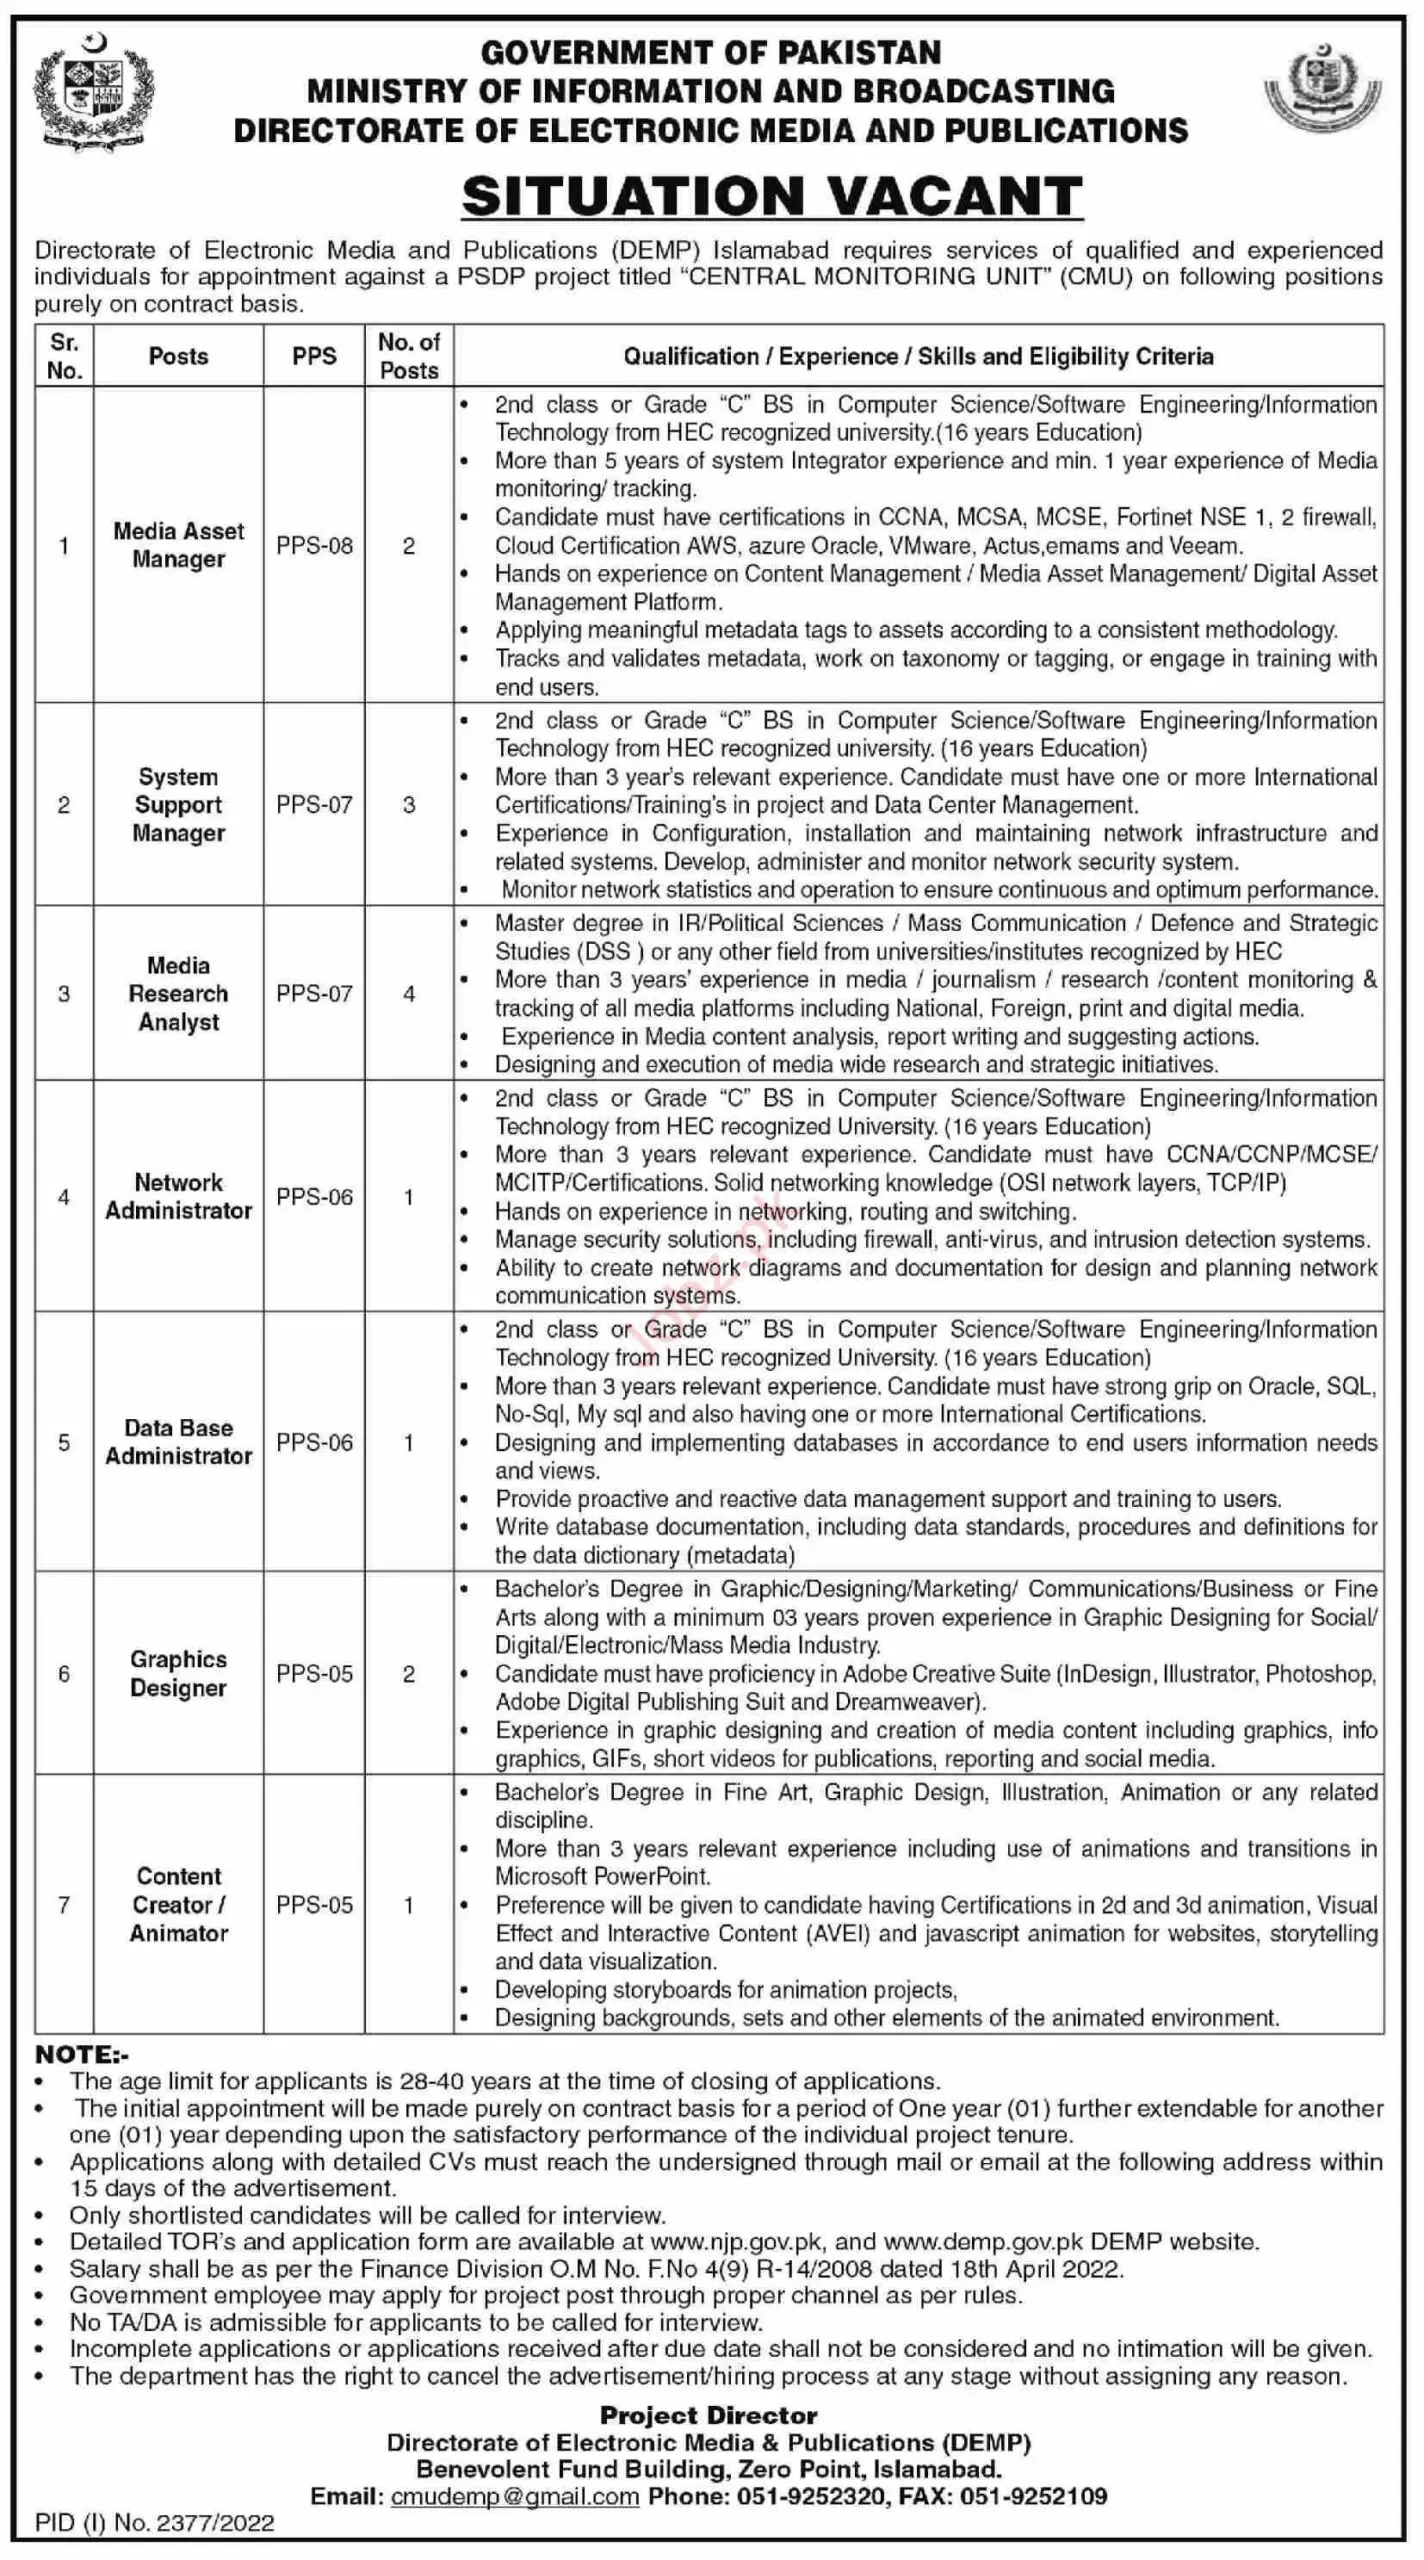 Ministry of Information and Broadcasting Jobs 2022 - www.moib.gov.pk jobs 2022